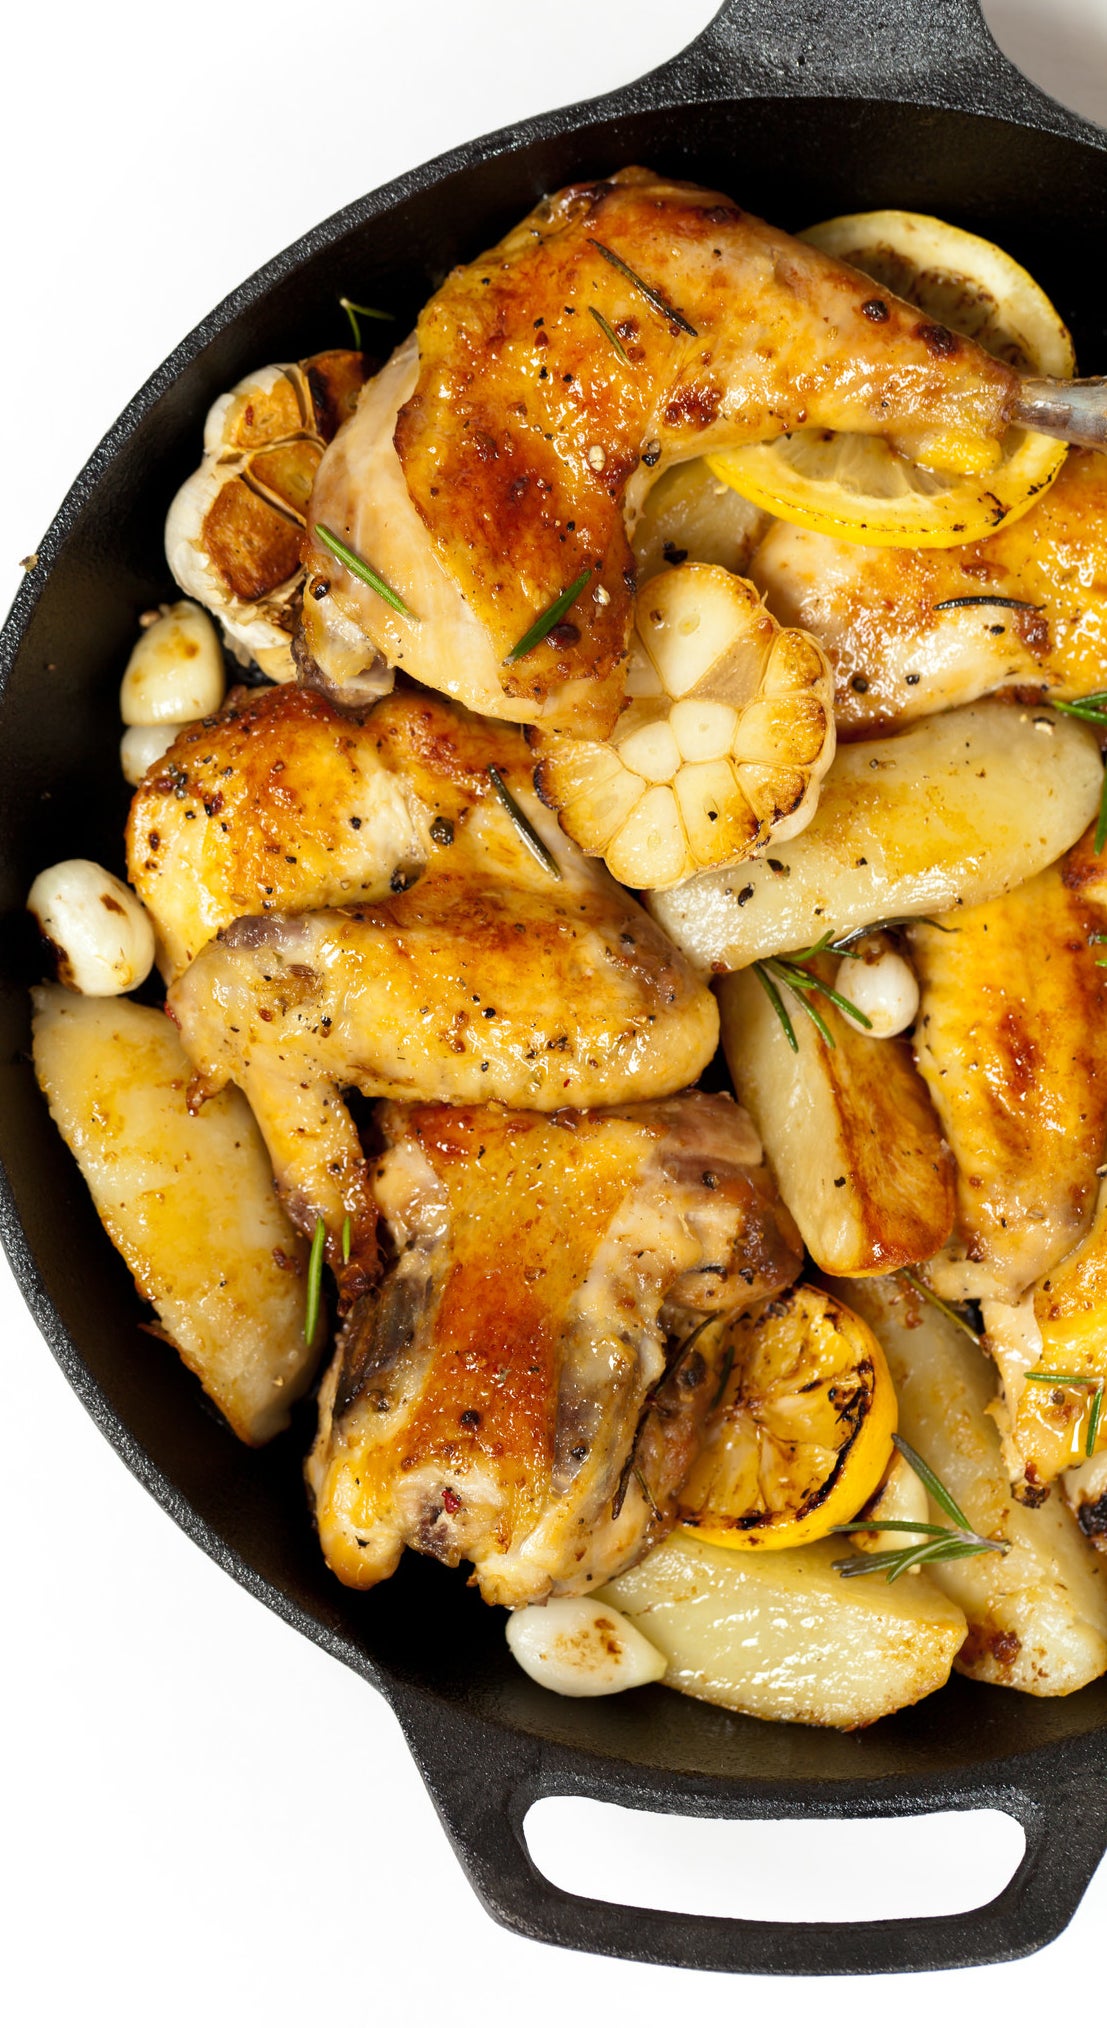 Chicken skillet with potatoes.